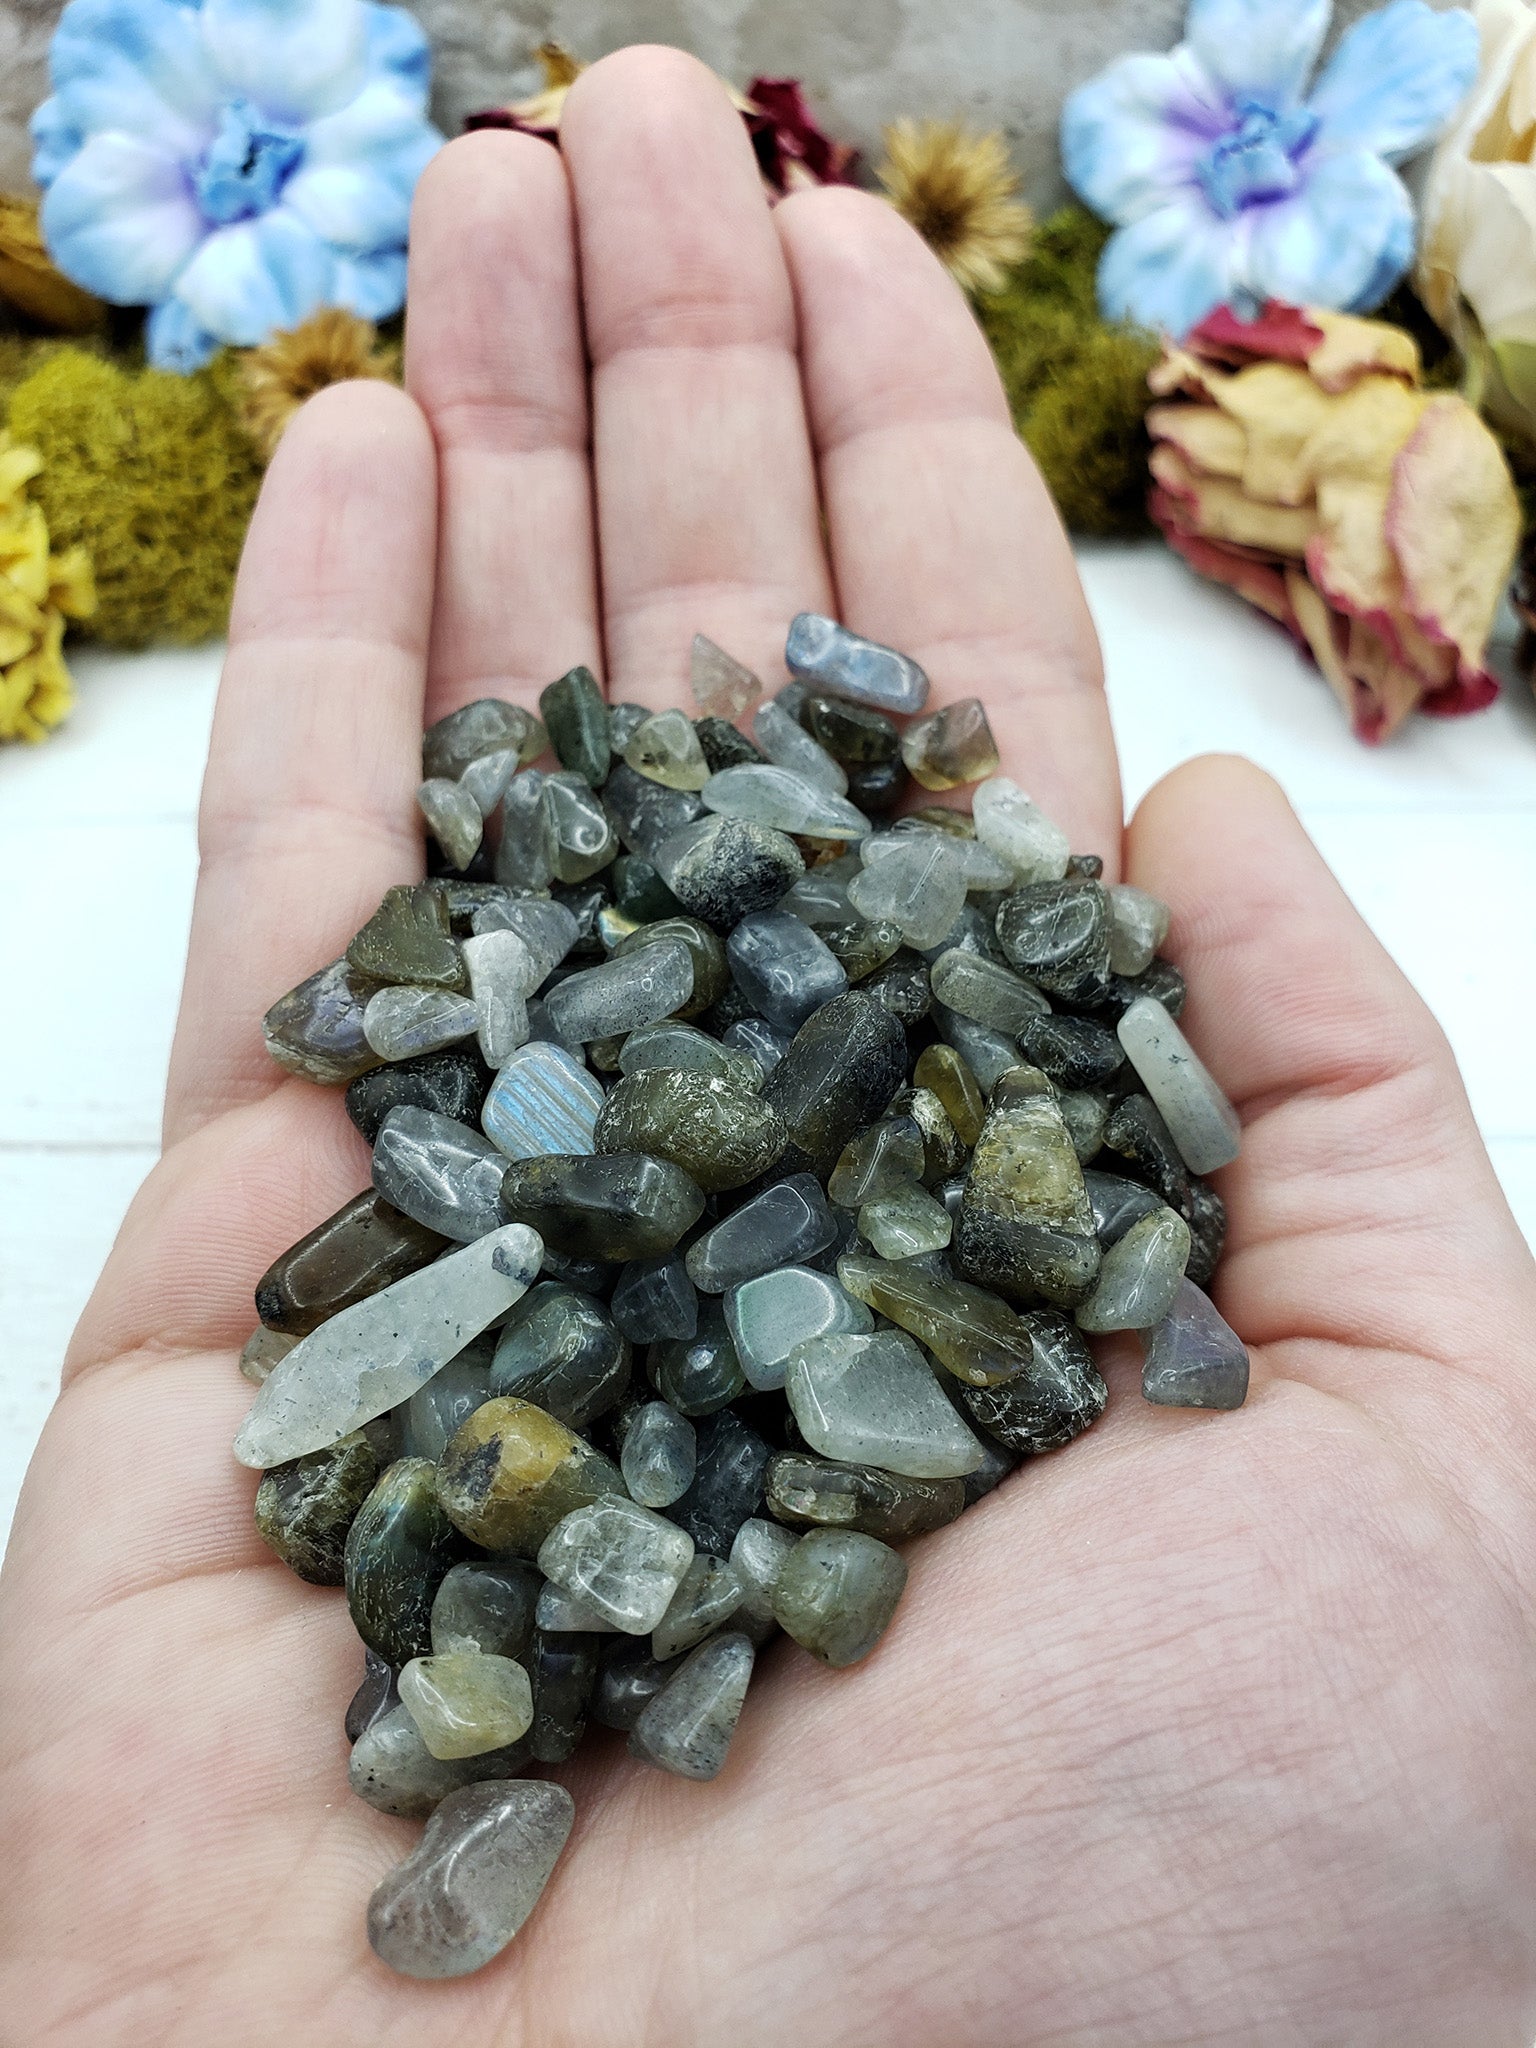 Three ounces of labradorite crystal chips in hand